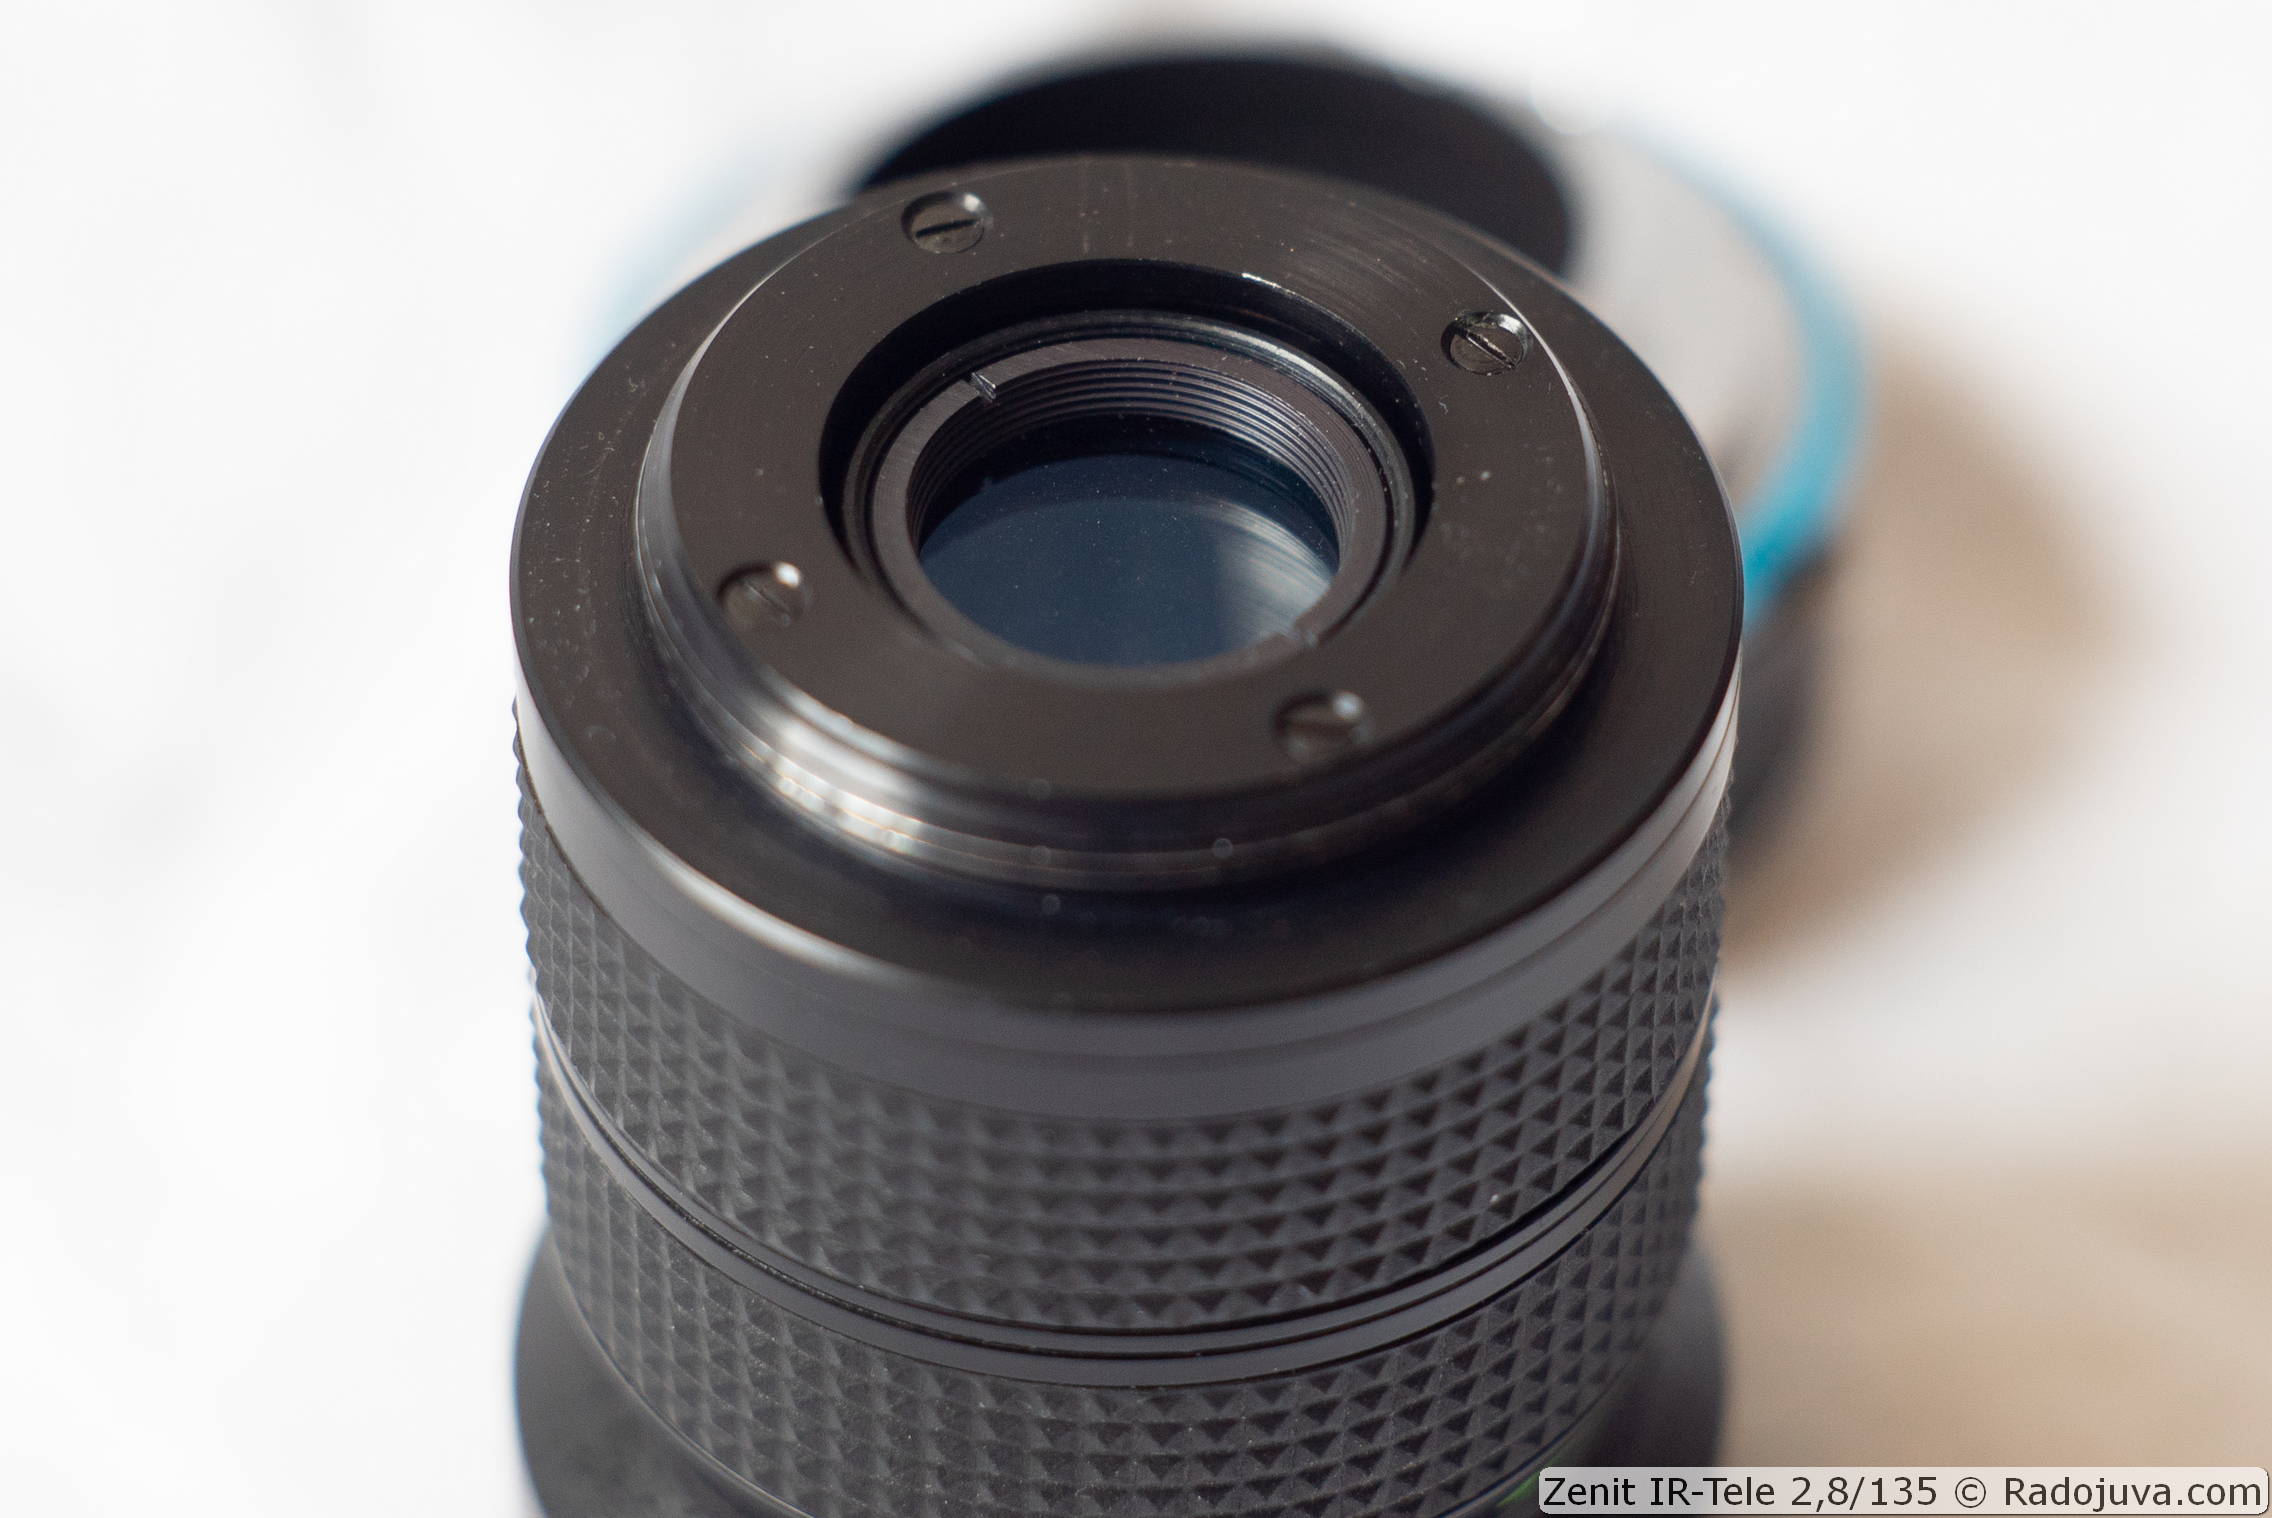 View of the lens from the side of the rear lens when focusing on MDF 5 m.